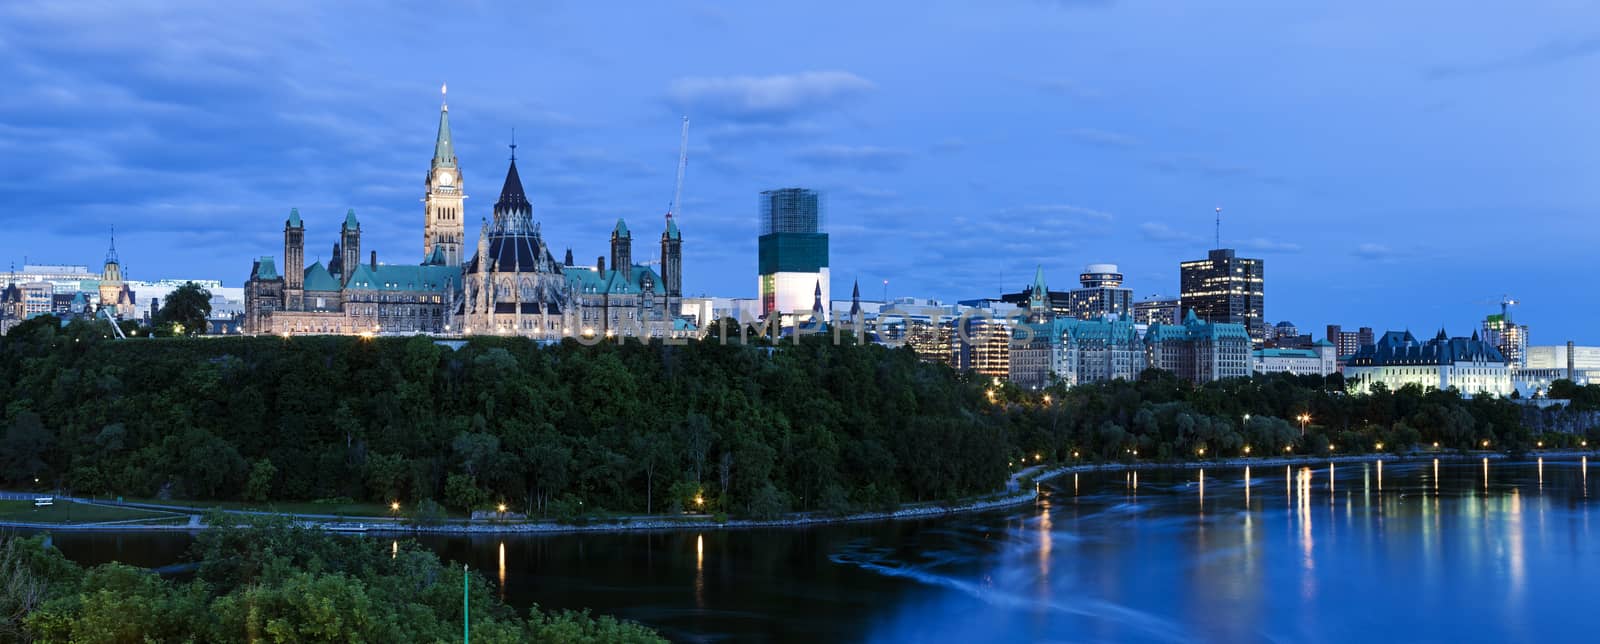 Peace Tower and Parliament Building - Ottawa, Ontario, Canada